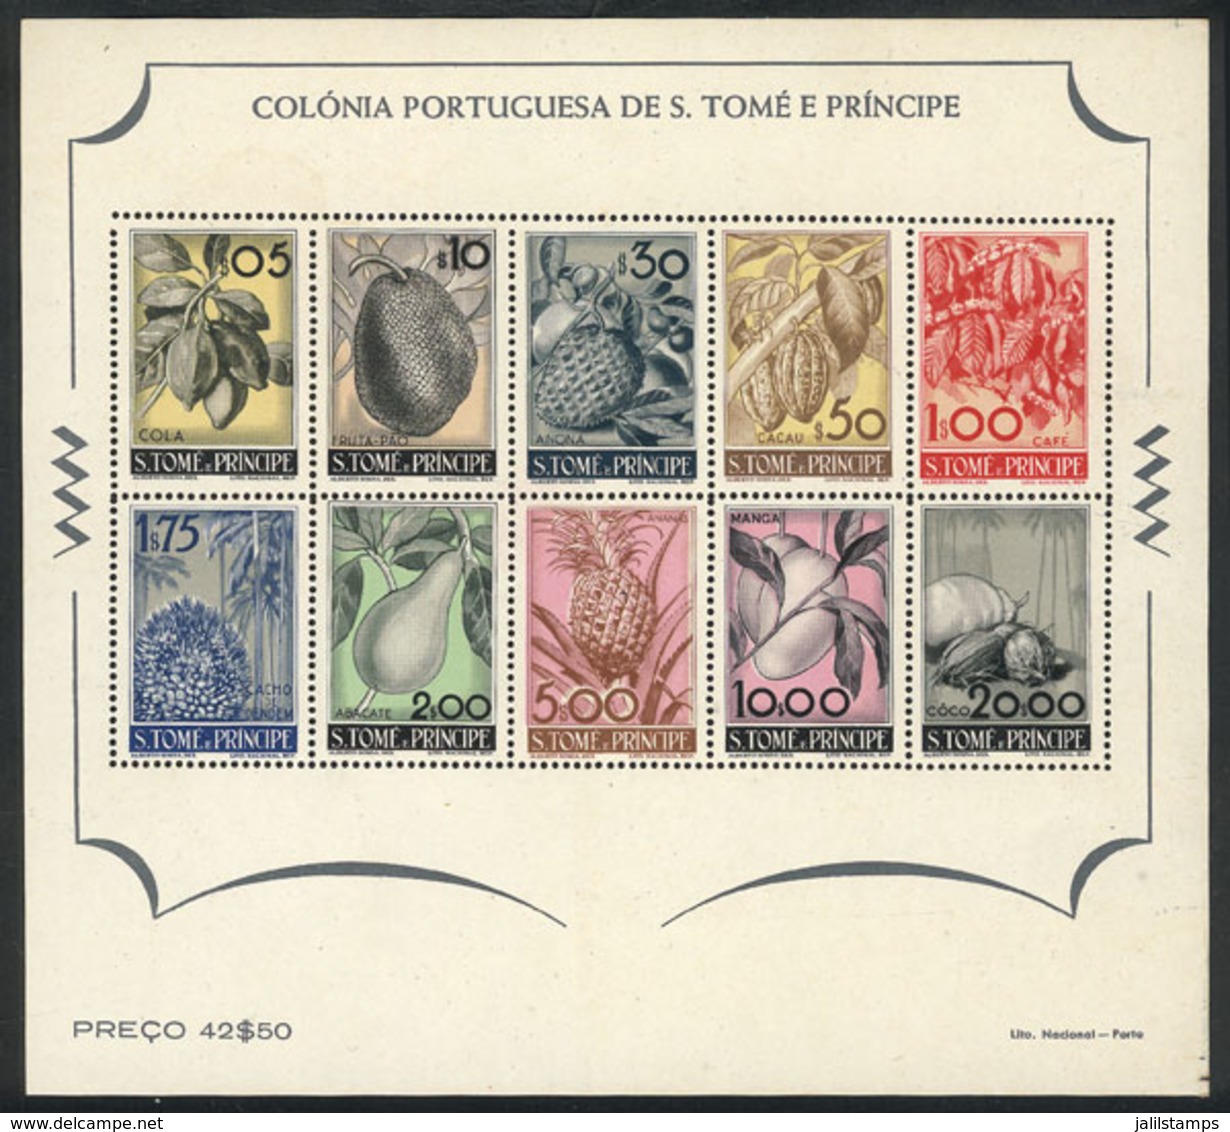 SAO TOME AND PRINCIPE: Yvert 1, 1949 Fruit, MNH But With Light Staining Of The Gum, Very Fine Appearance, Low Start! - St. Thomas & Prince